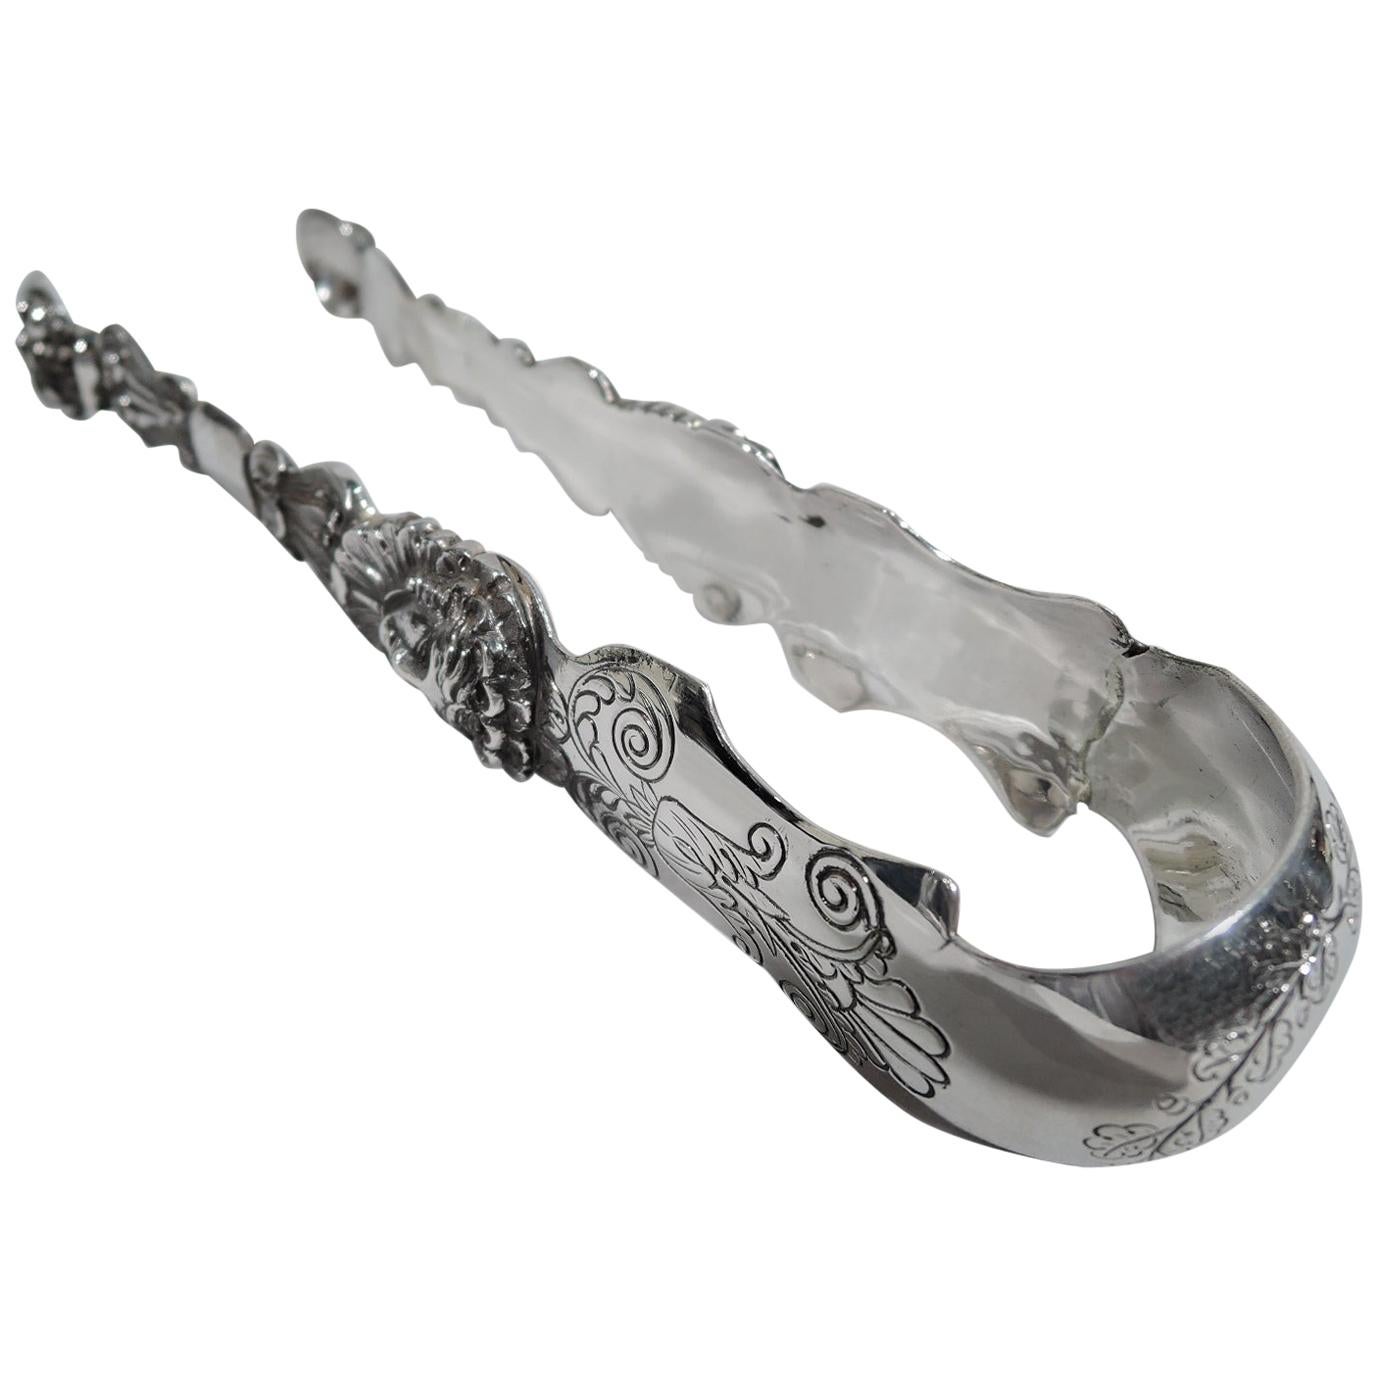 Antique European Silver Ice Tongs with Bold Classical Ornament